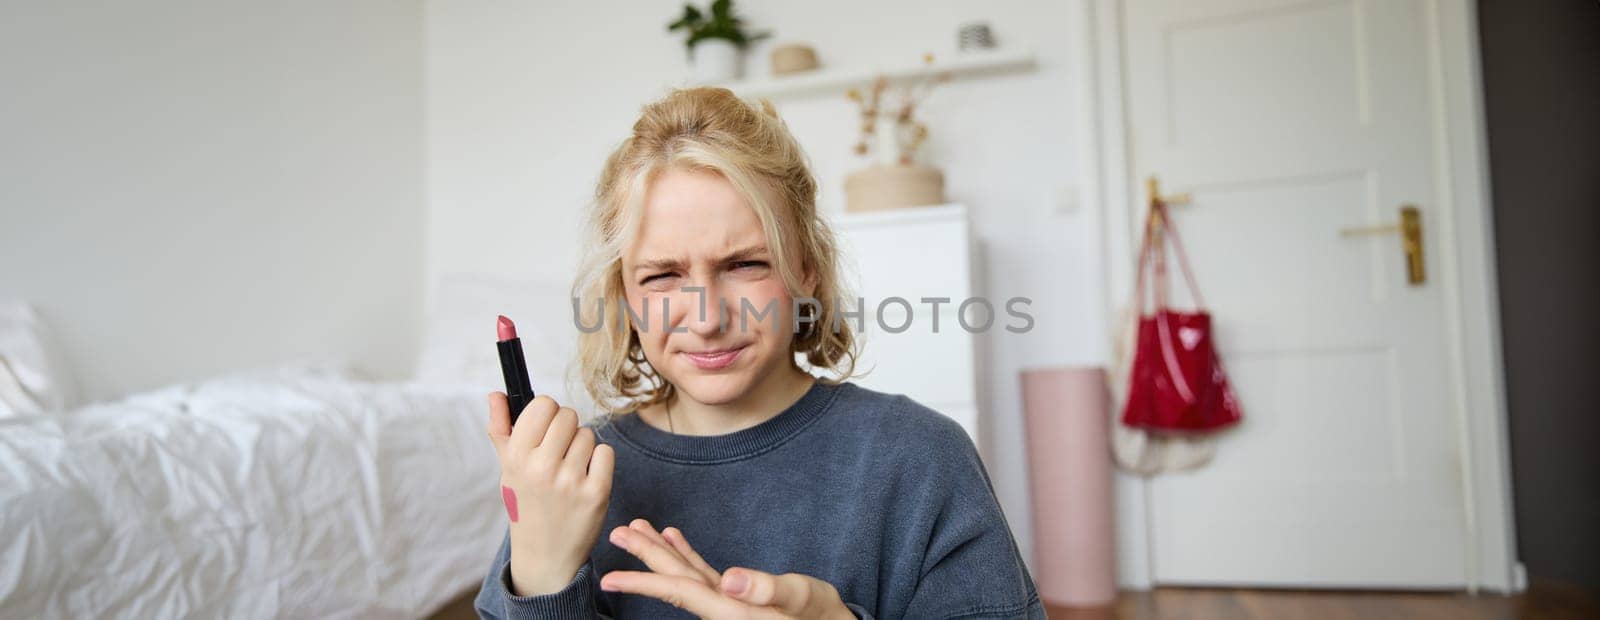 Portrait of young blogger, woman recording video about beauty, makeup products, showing lipstick and grimacing, express negative opinion, creating a lifestyle vlog content.